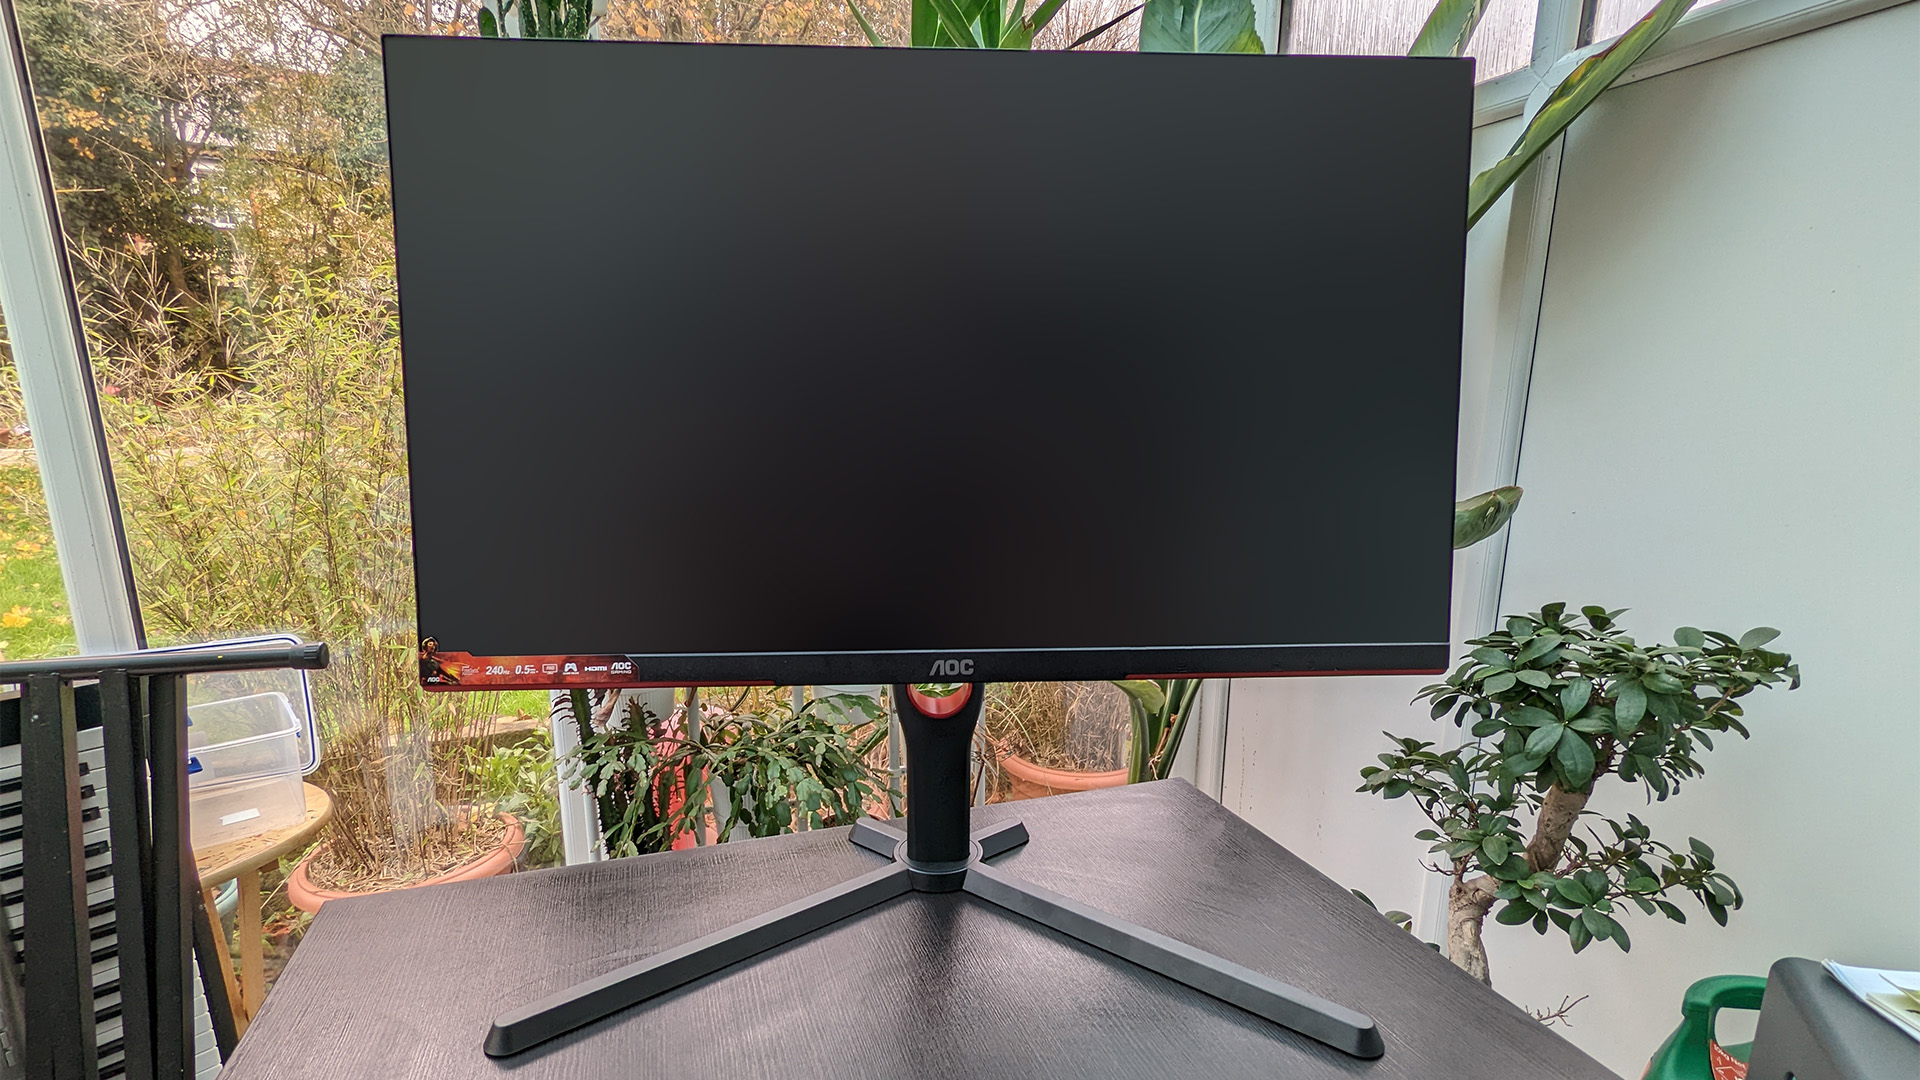 AOC 24G2ZU 240Hz Gaming Monitor Review - A Great Budget Option! 